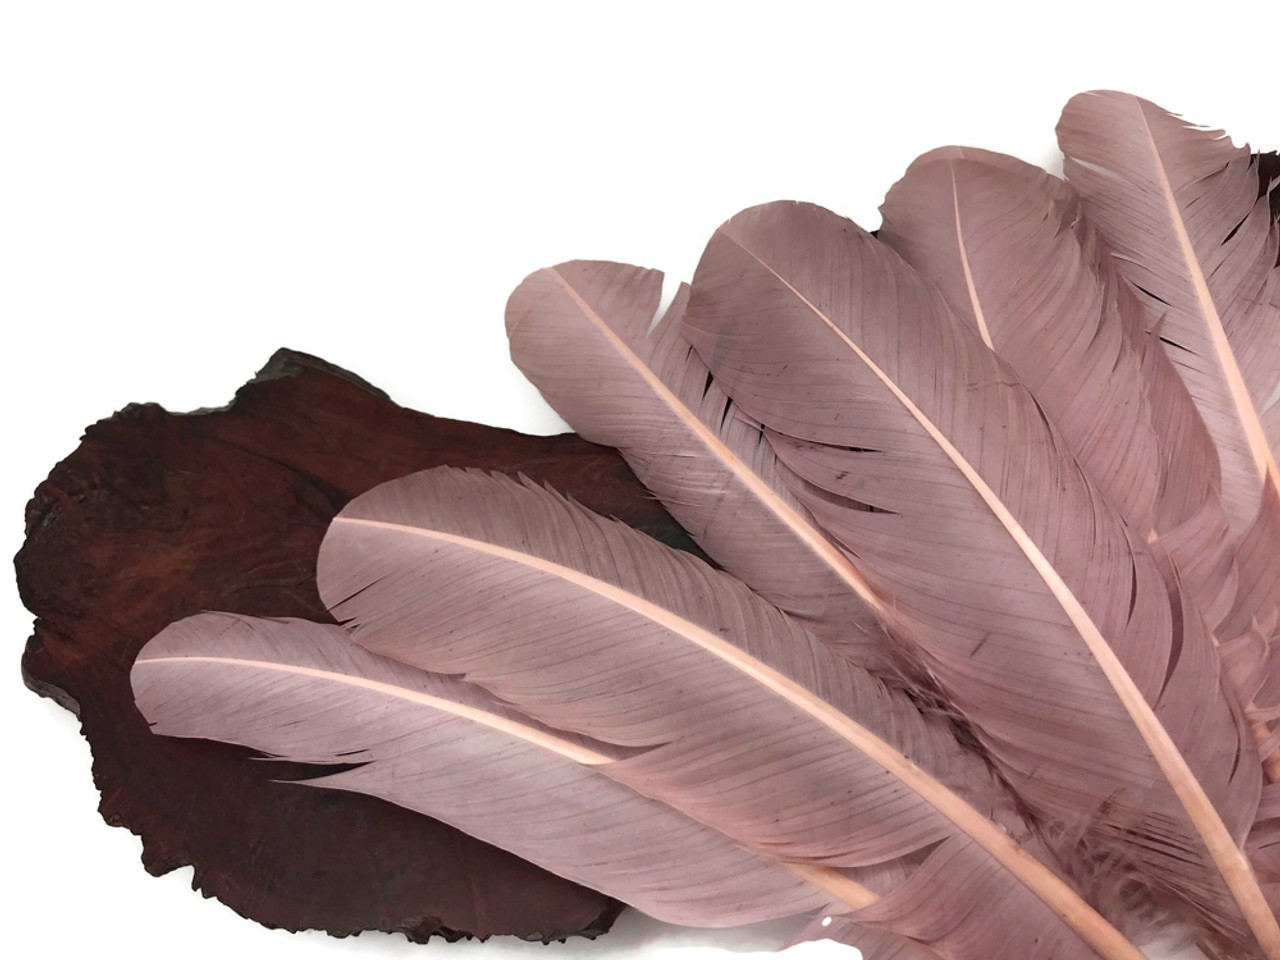 1/4 lb - Brown Turkey Tom Rounds Secondary Wing Quill Wholesale Feathers (Bulk) Halloween Wedding Craft Supply | Moonlight Feather